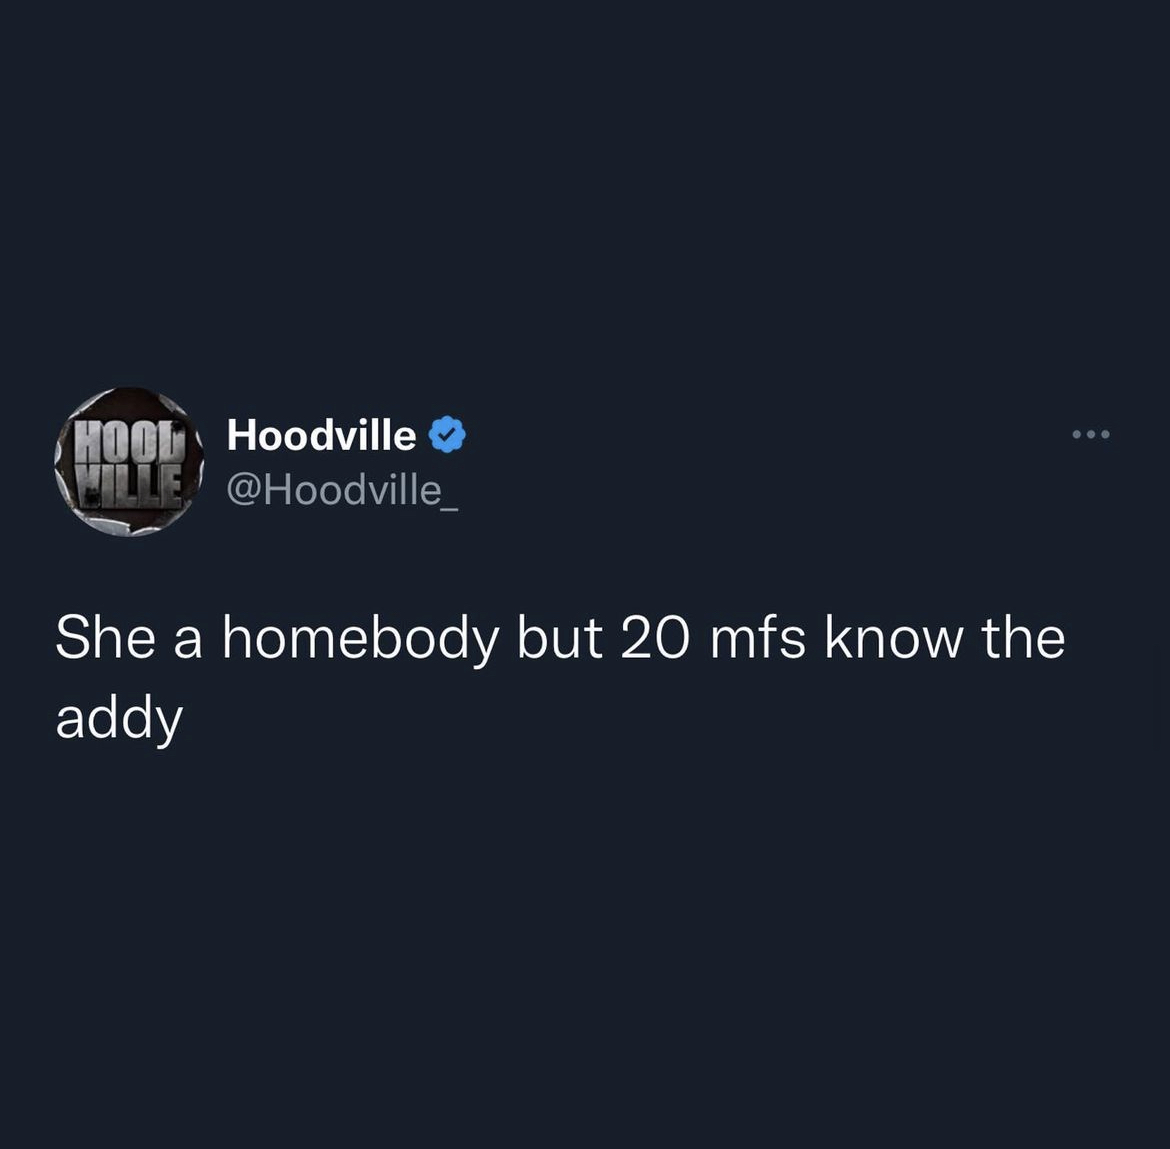 Hoodville memes and captions - atmosphere - Hool Hoodville Wille! She a homebody but 20 mfs know the addy ...